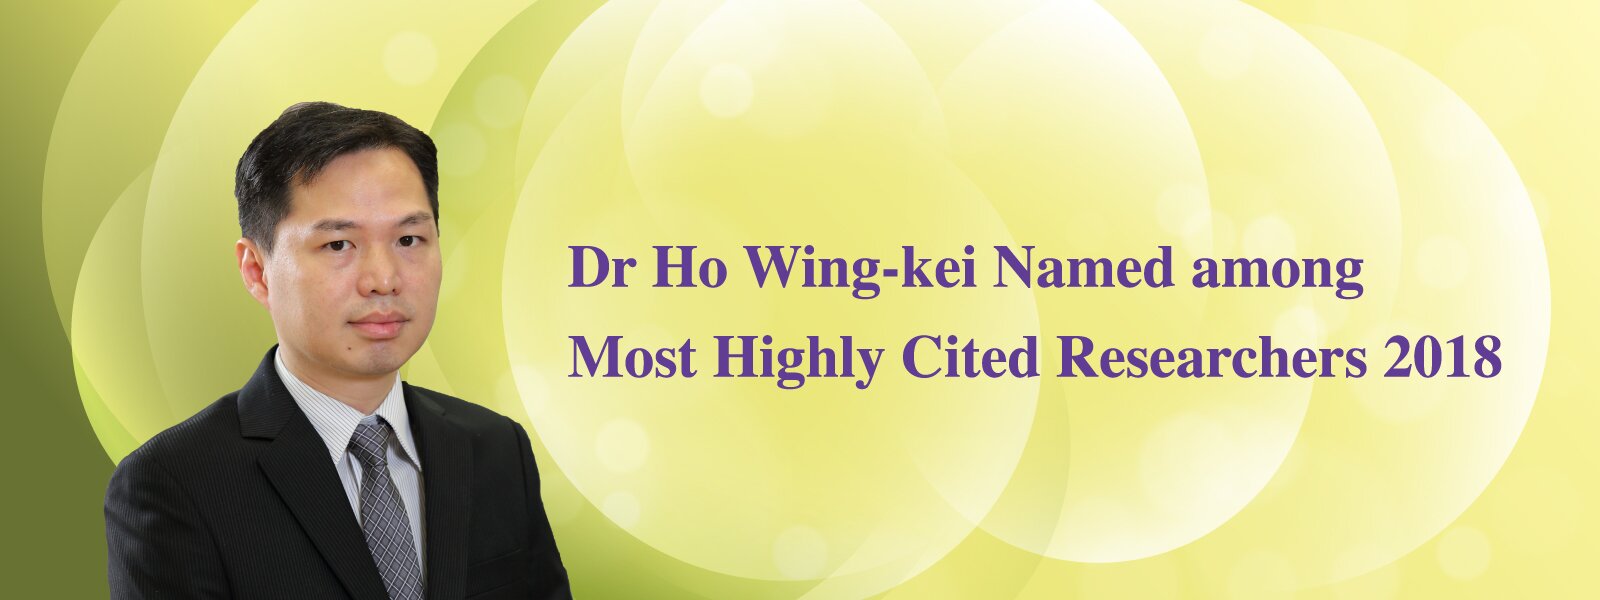 Dr Ho Wing-kei Named among Most Highly Cited Researchers 2018